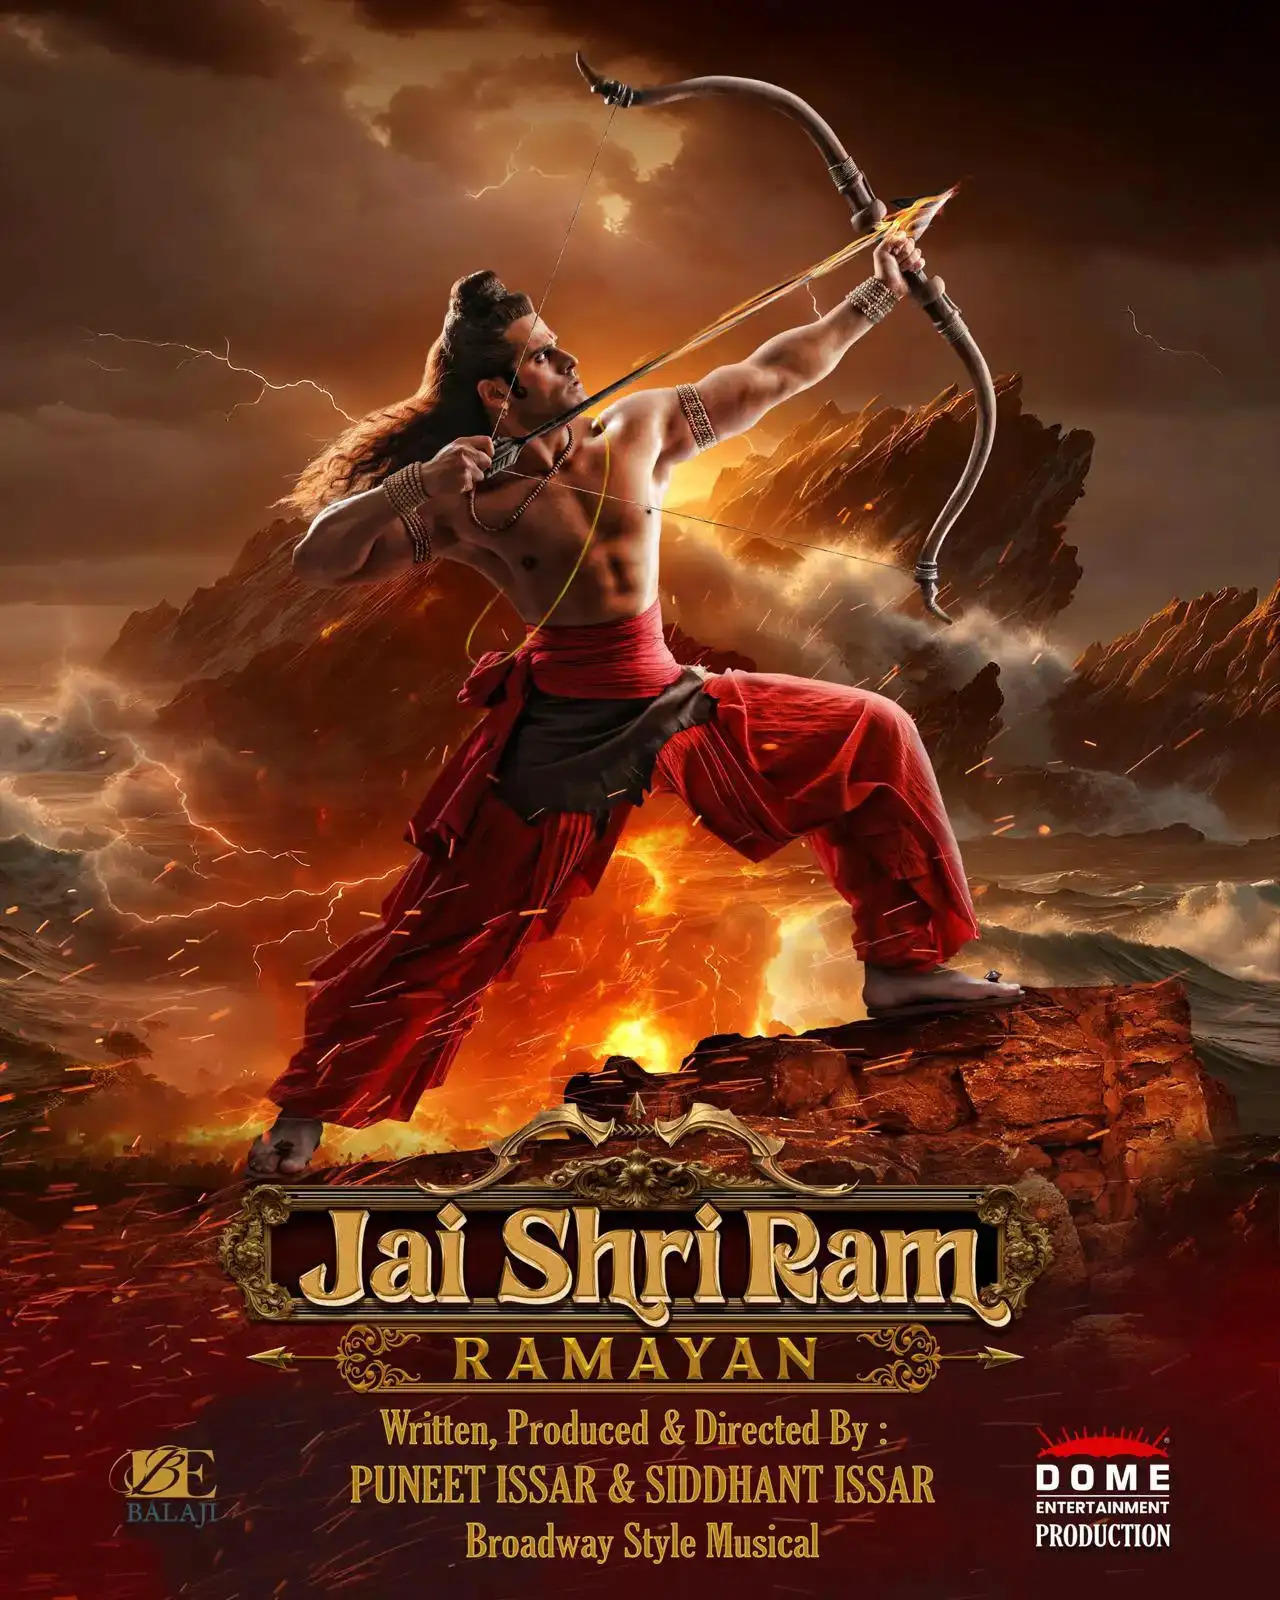 Puneet Issar premiers the Broadway-style musical, 'Jai Shri Ram – Ramayan,' for the first time in the USA & Canada